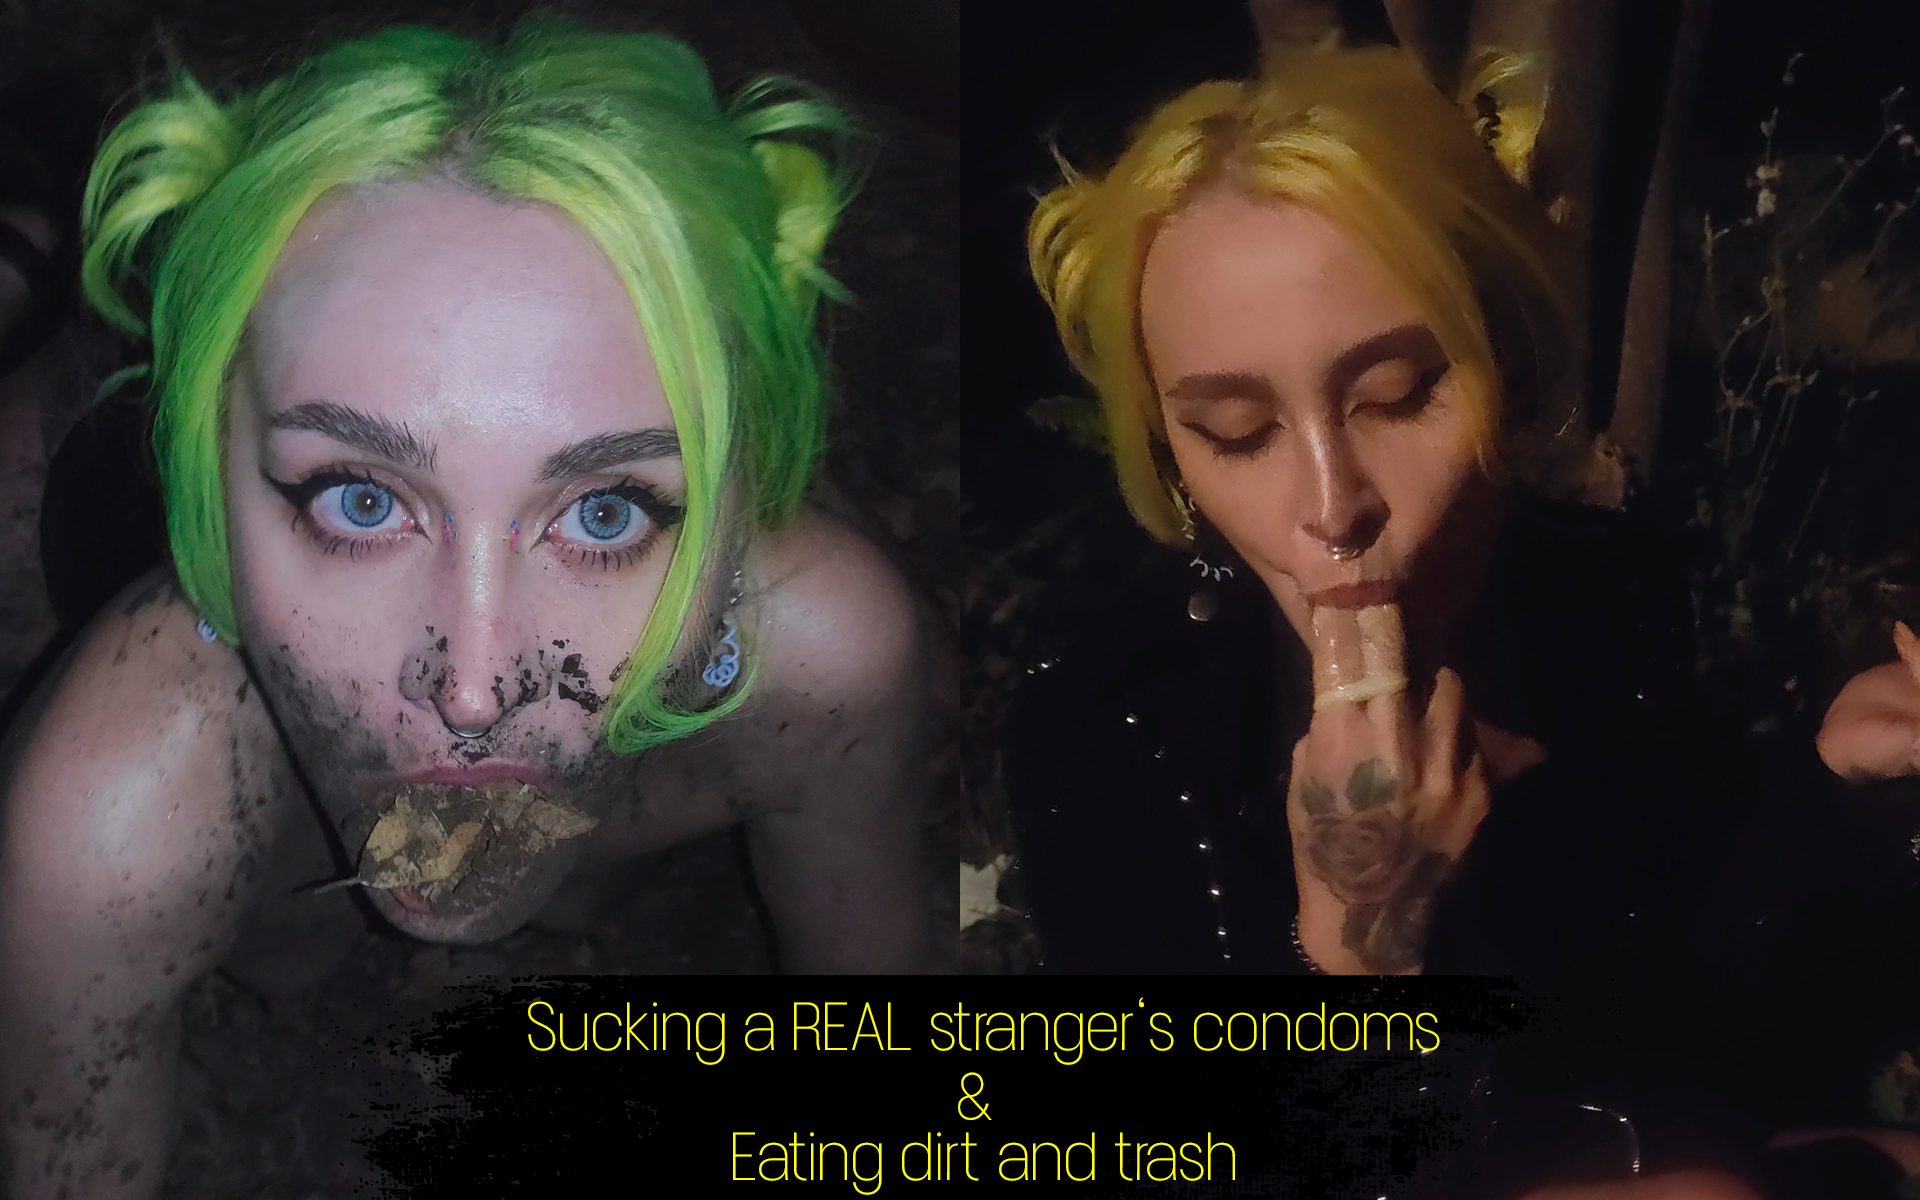 Sucking a real stranger's condoms eating trash and dirt